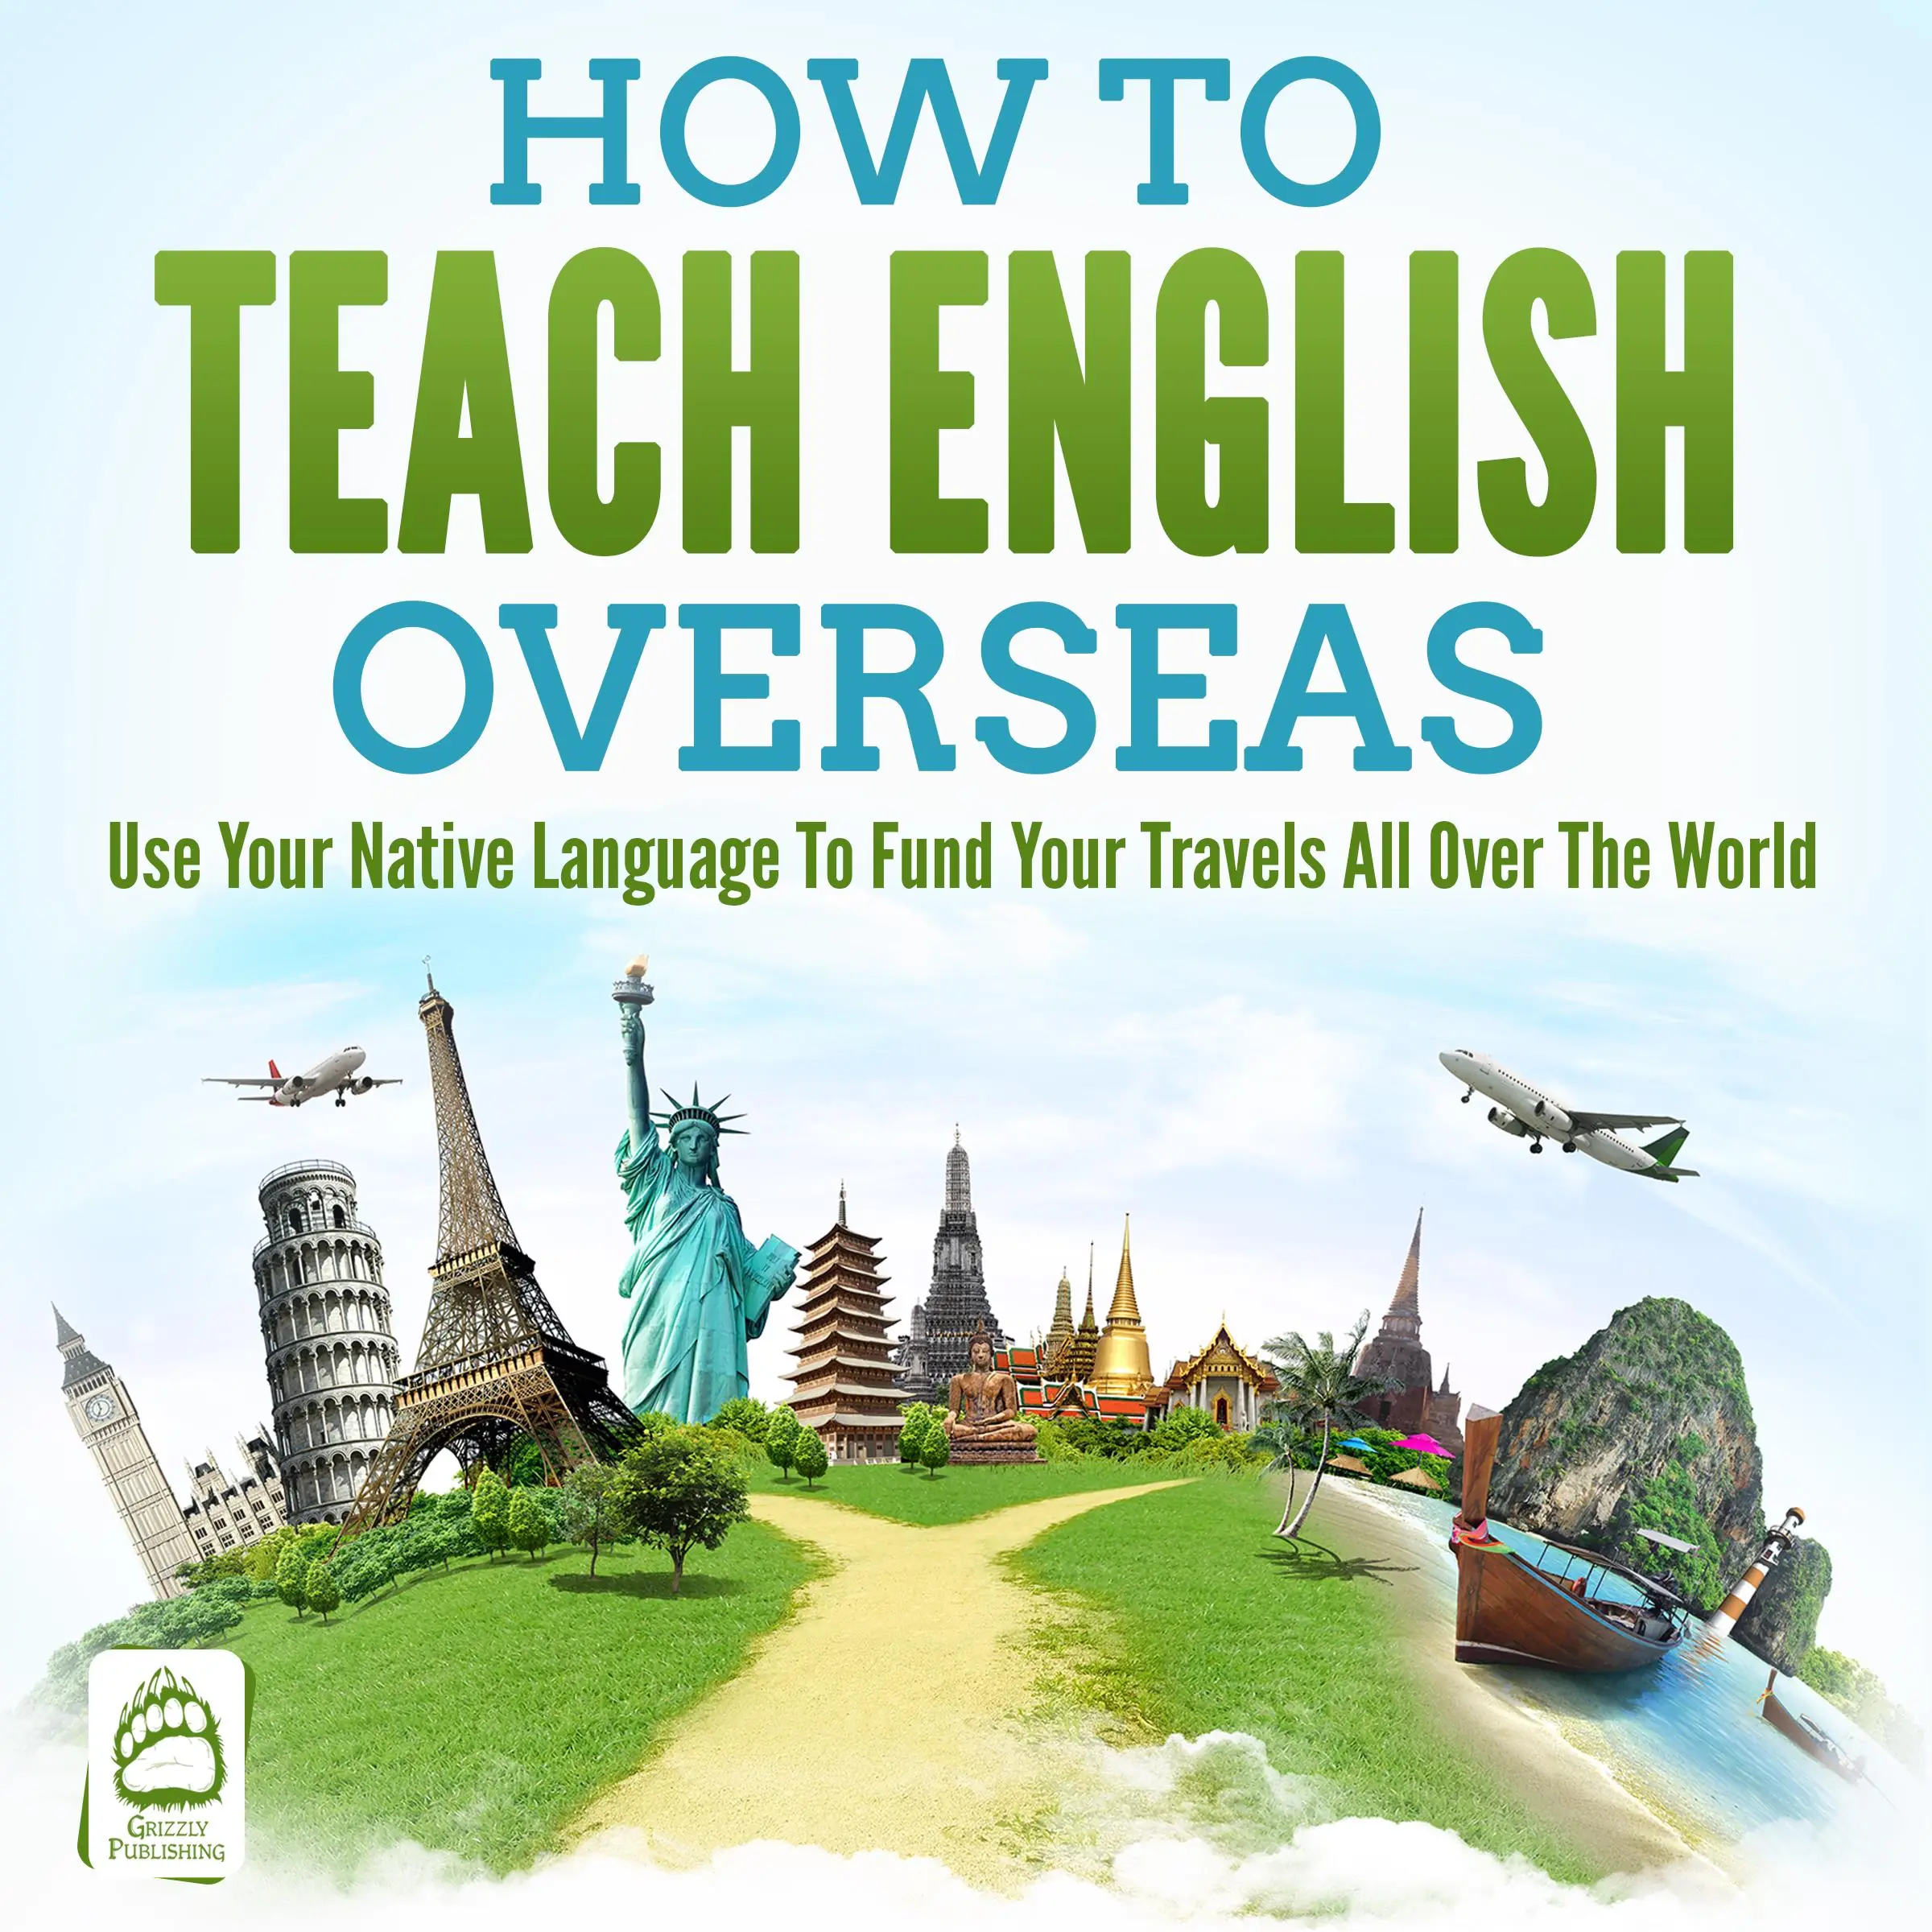 How To Teach English Overseas: Use Your Native Language To Fund Your Travels All Over The World Audiobook by Grizzly Publishing